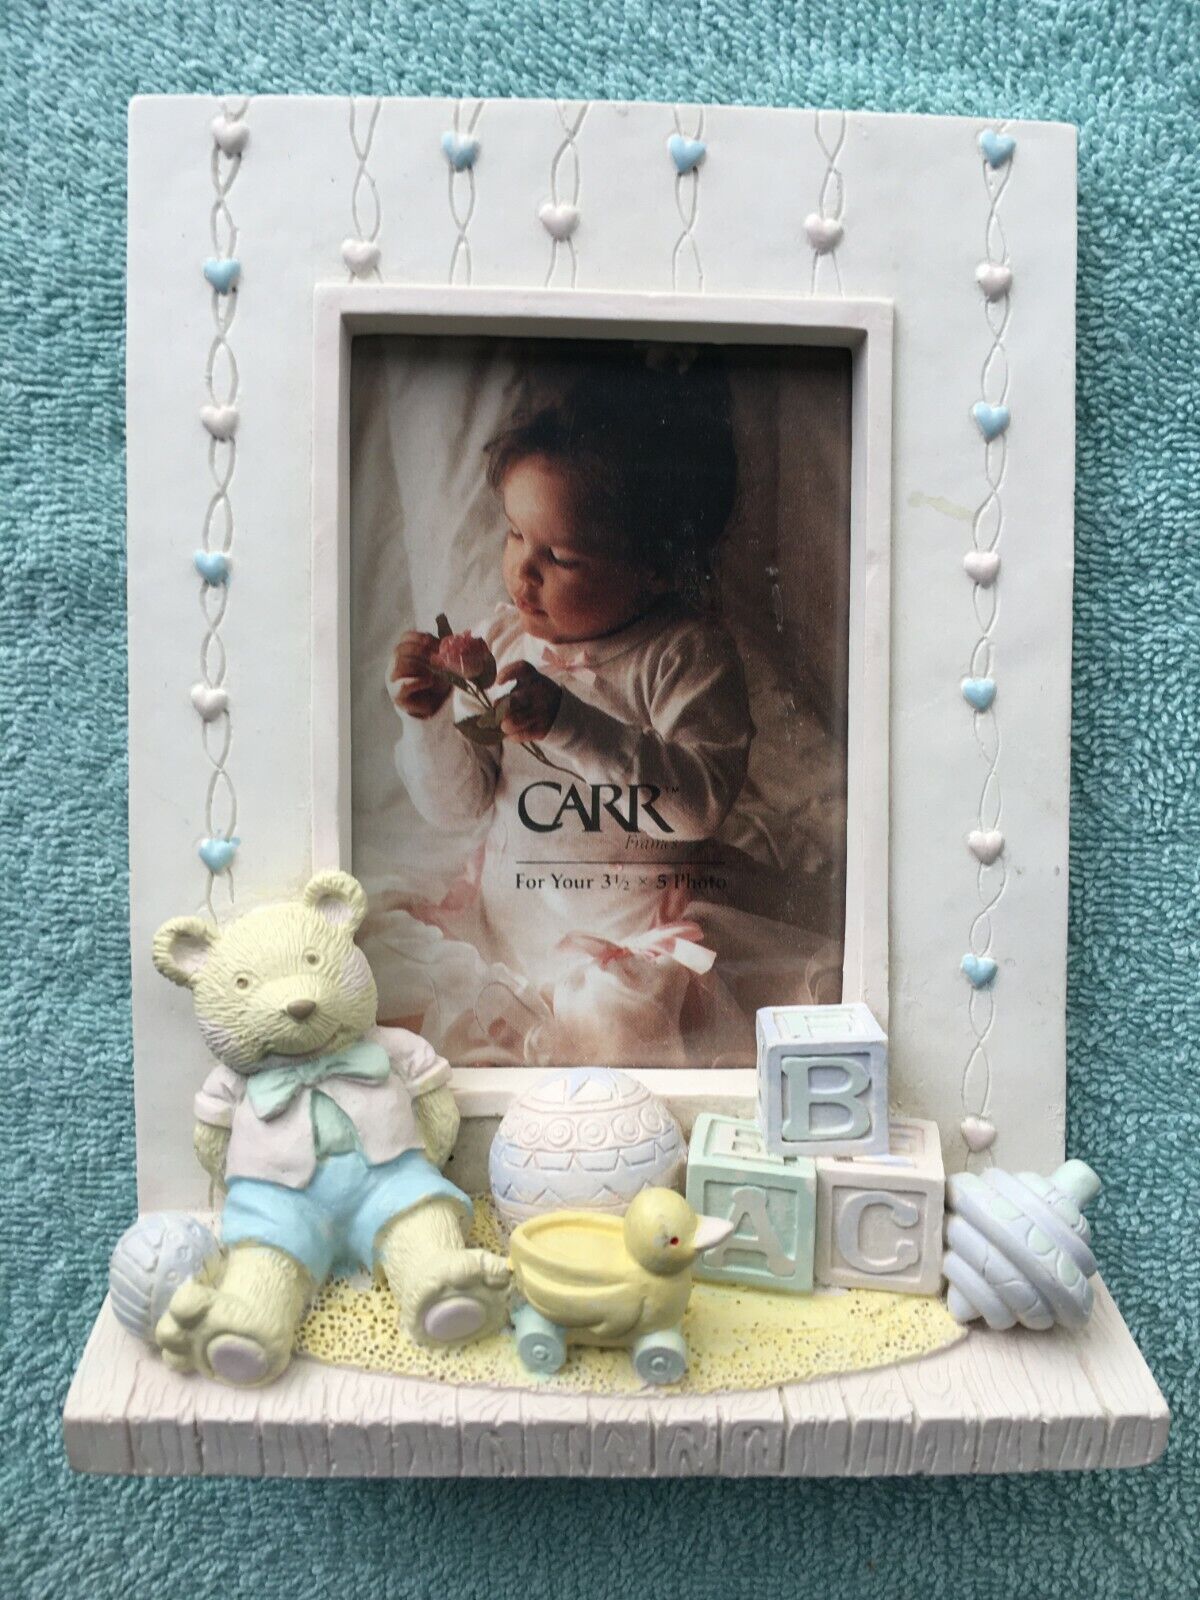 Carr 3-d Teddy Bear Baby Picture Frame For 3 ½ X 5 Photo (new)